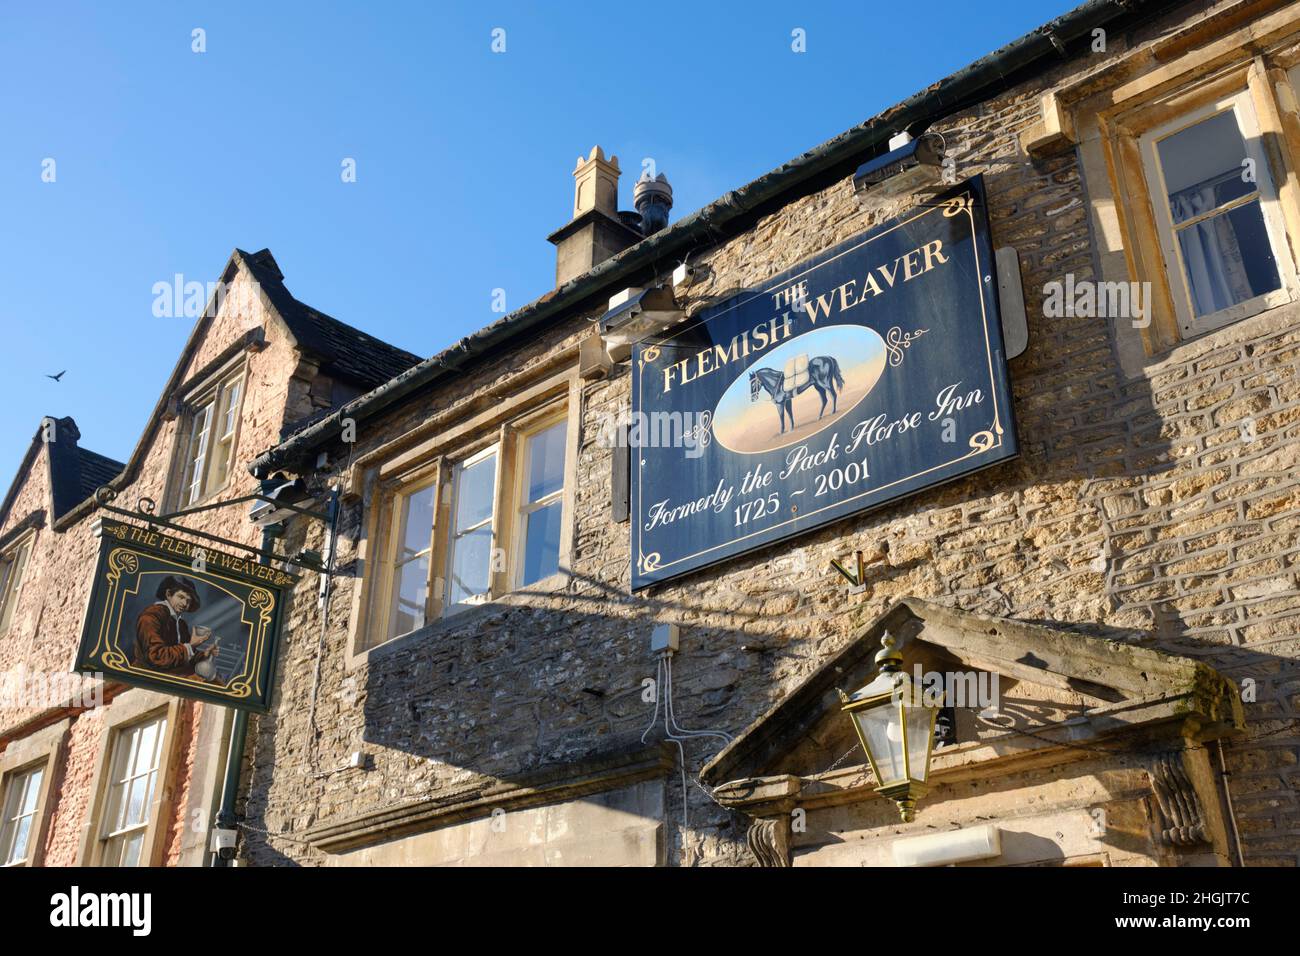 Bright winters day in Corsham, a small wiltshire Town. The Flemish Weaver Pub Stock Photo